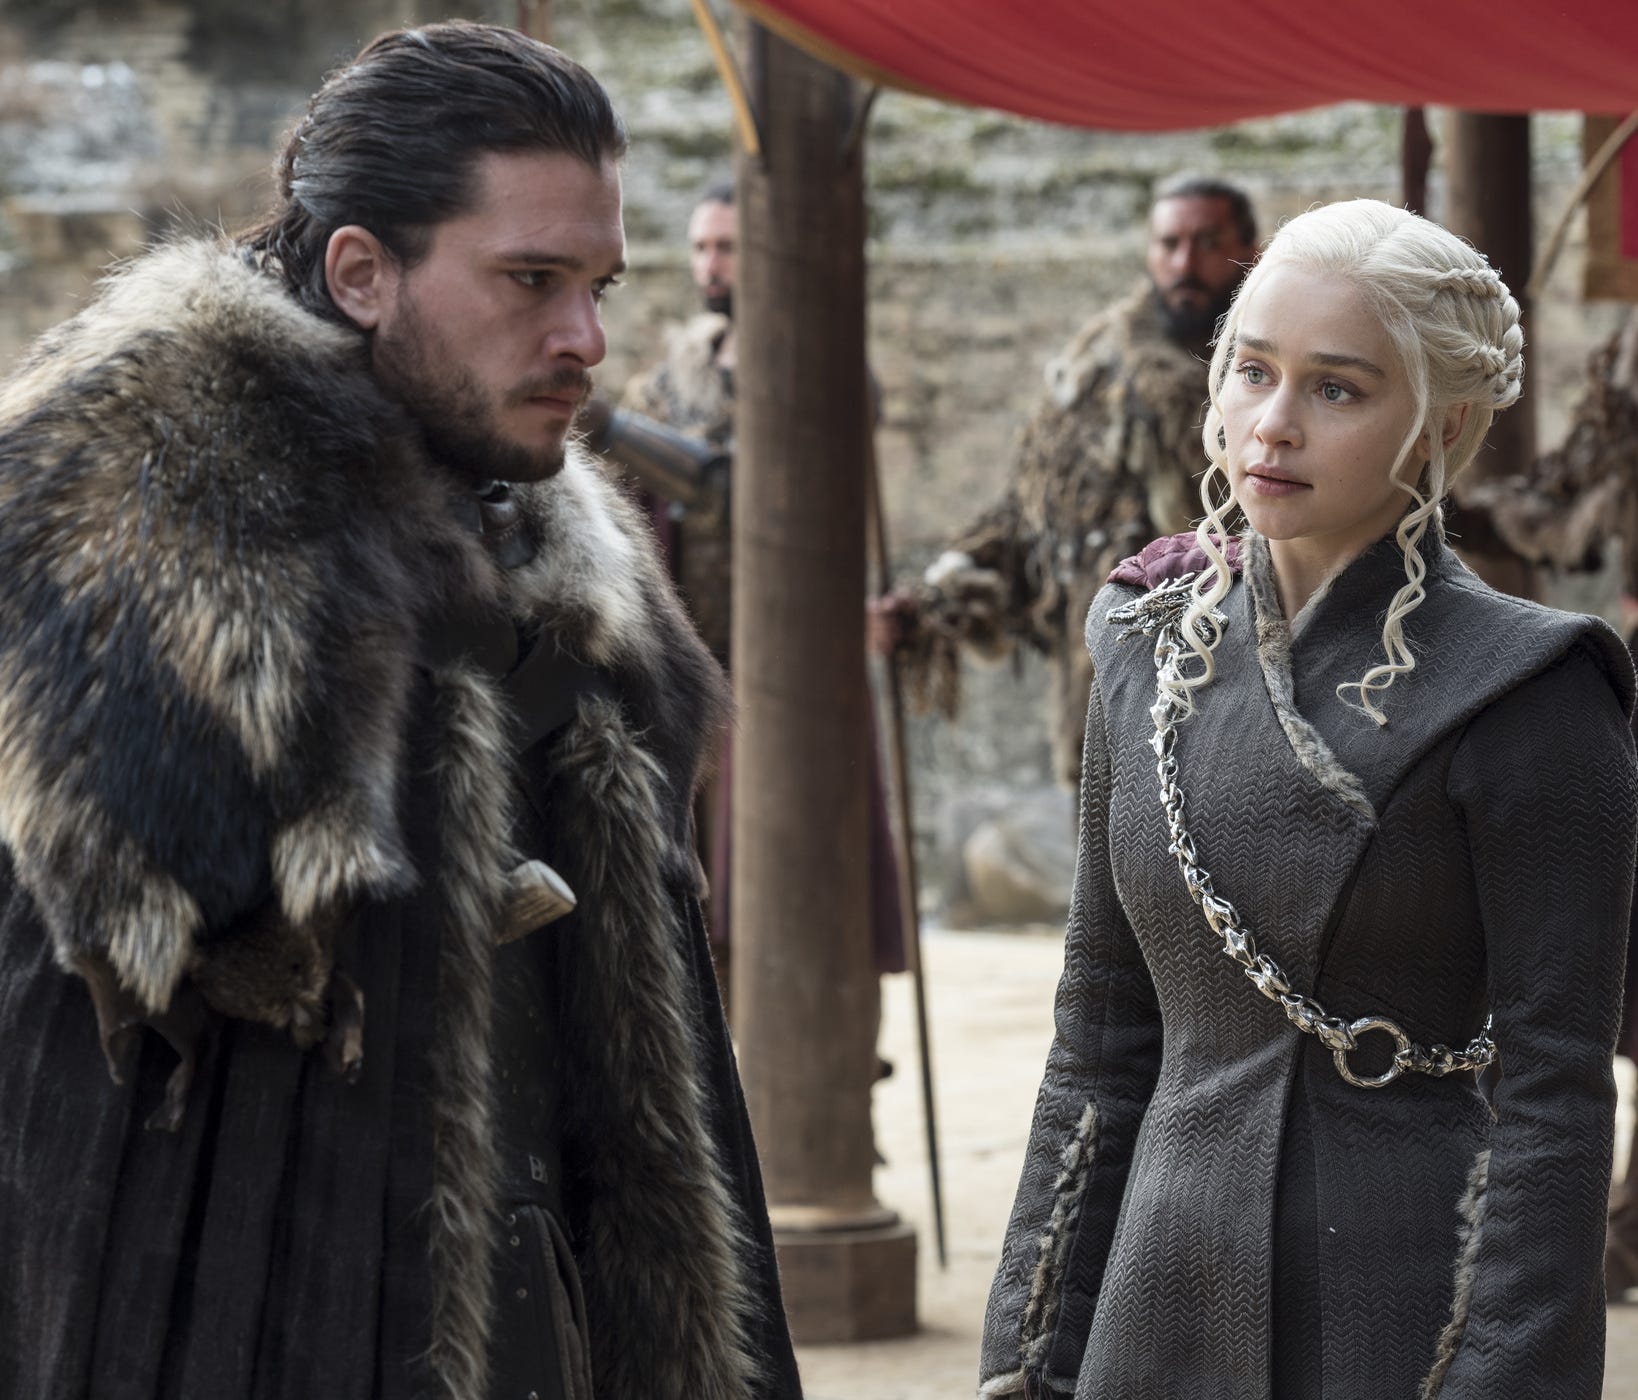 Jon and Dany's relationship continues to grow, as he still doesn't know the truth about his parentage.